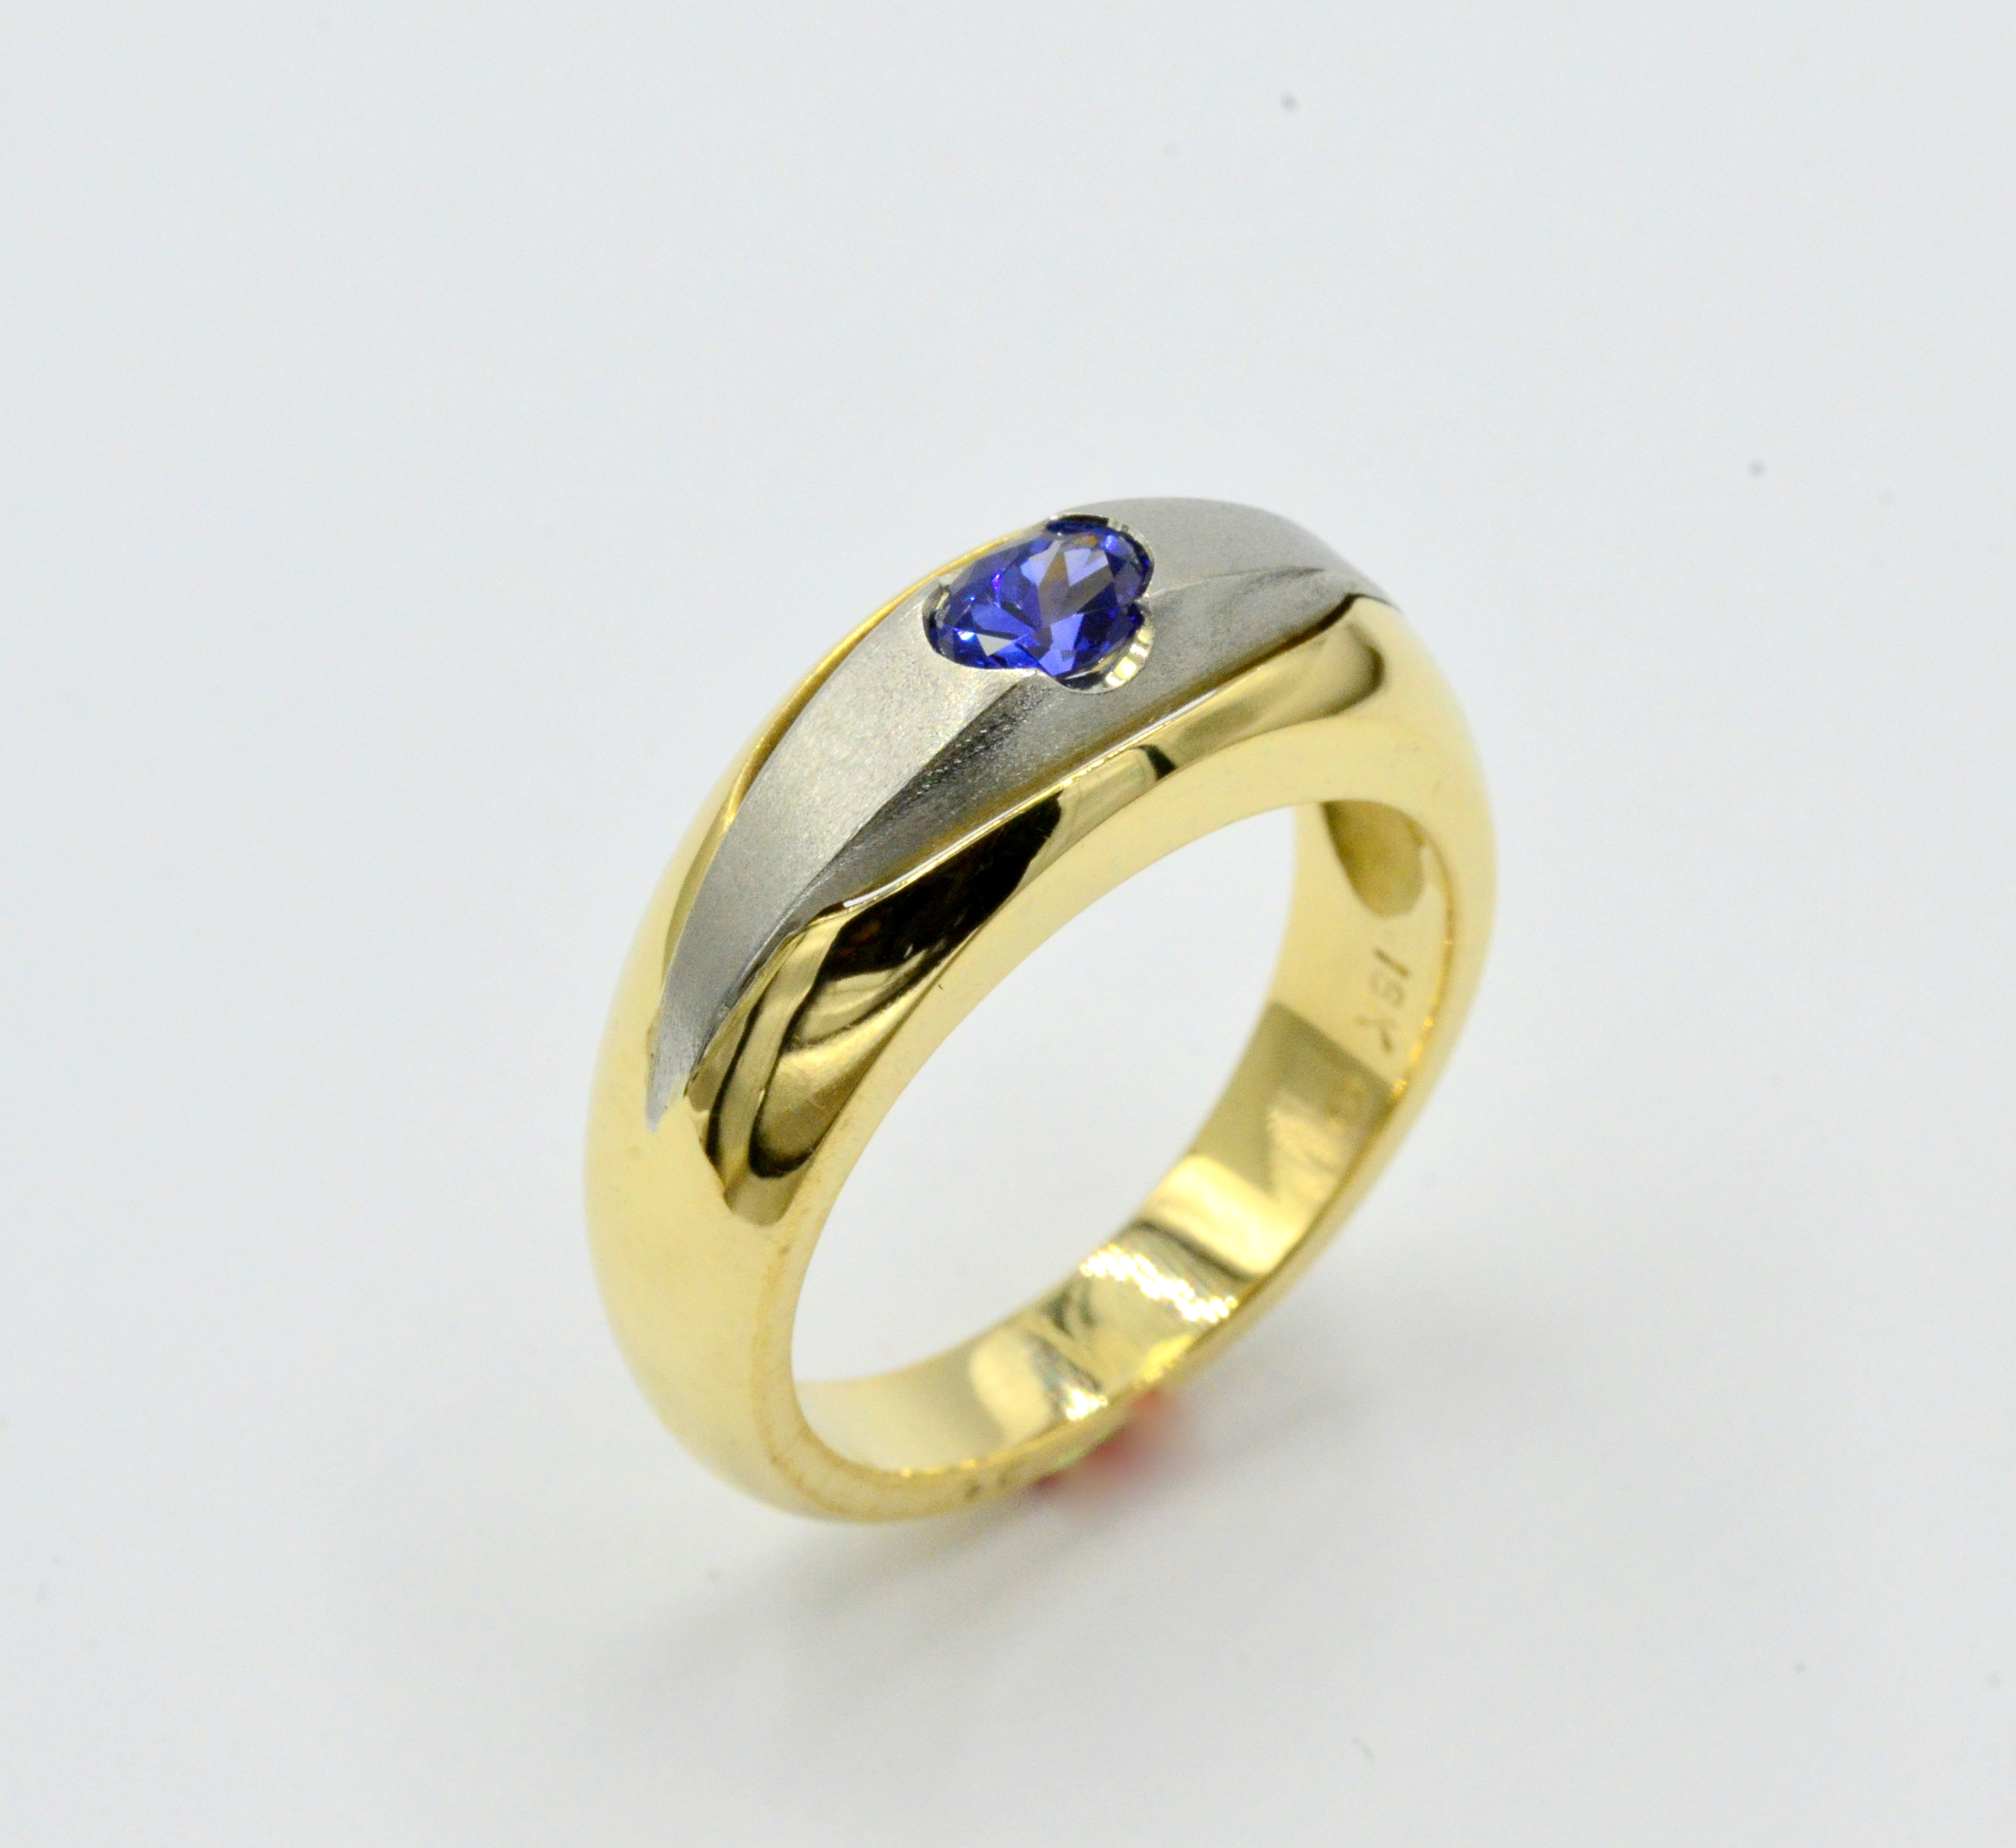 Beautiful Blue Sapphire set into a brushed white gold section. Flanked in rich 18 karat yellow gold .